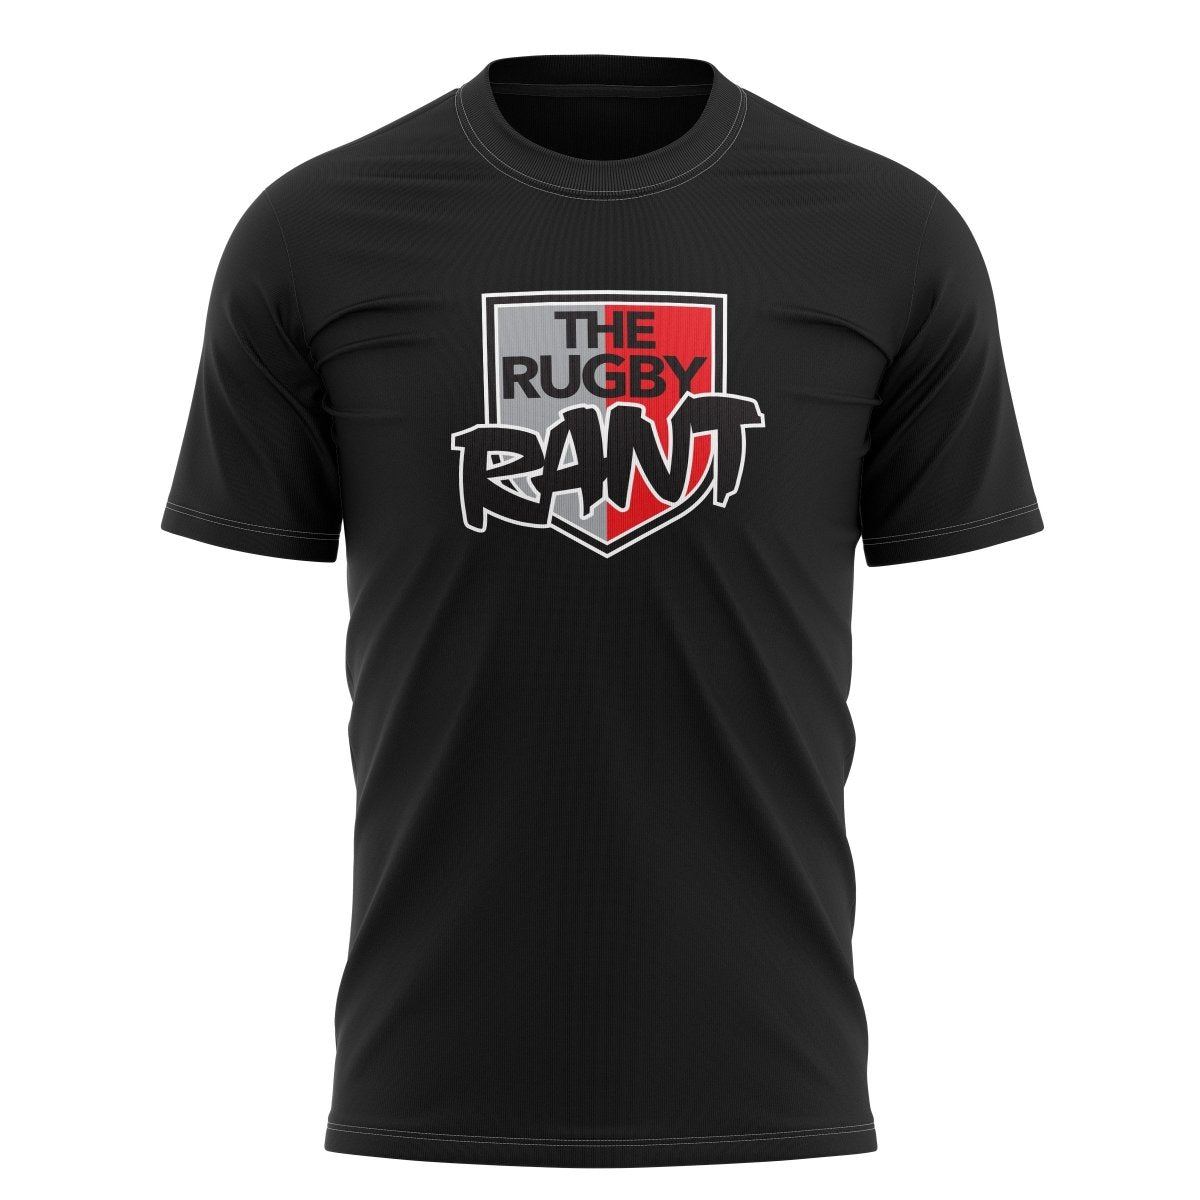 The Rugby Rant Logo Tee - Unisex - www.therugbyshop.com www.therugbyshop.com ADULT UNISEX / BLACK / S SANMAR TEES The Rugby Rant Logo Tee - Unisex